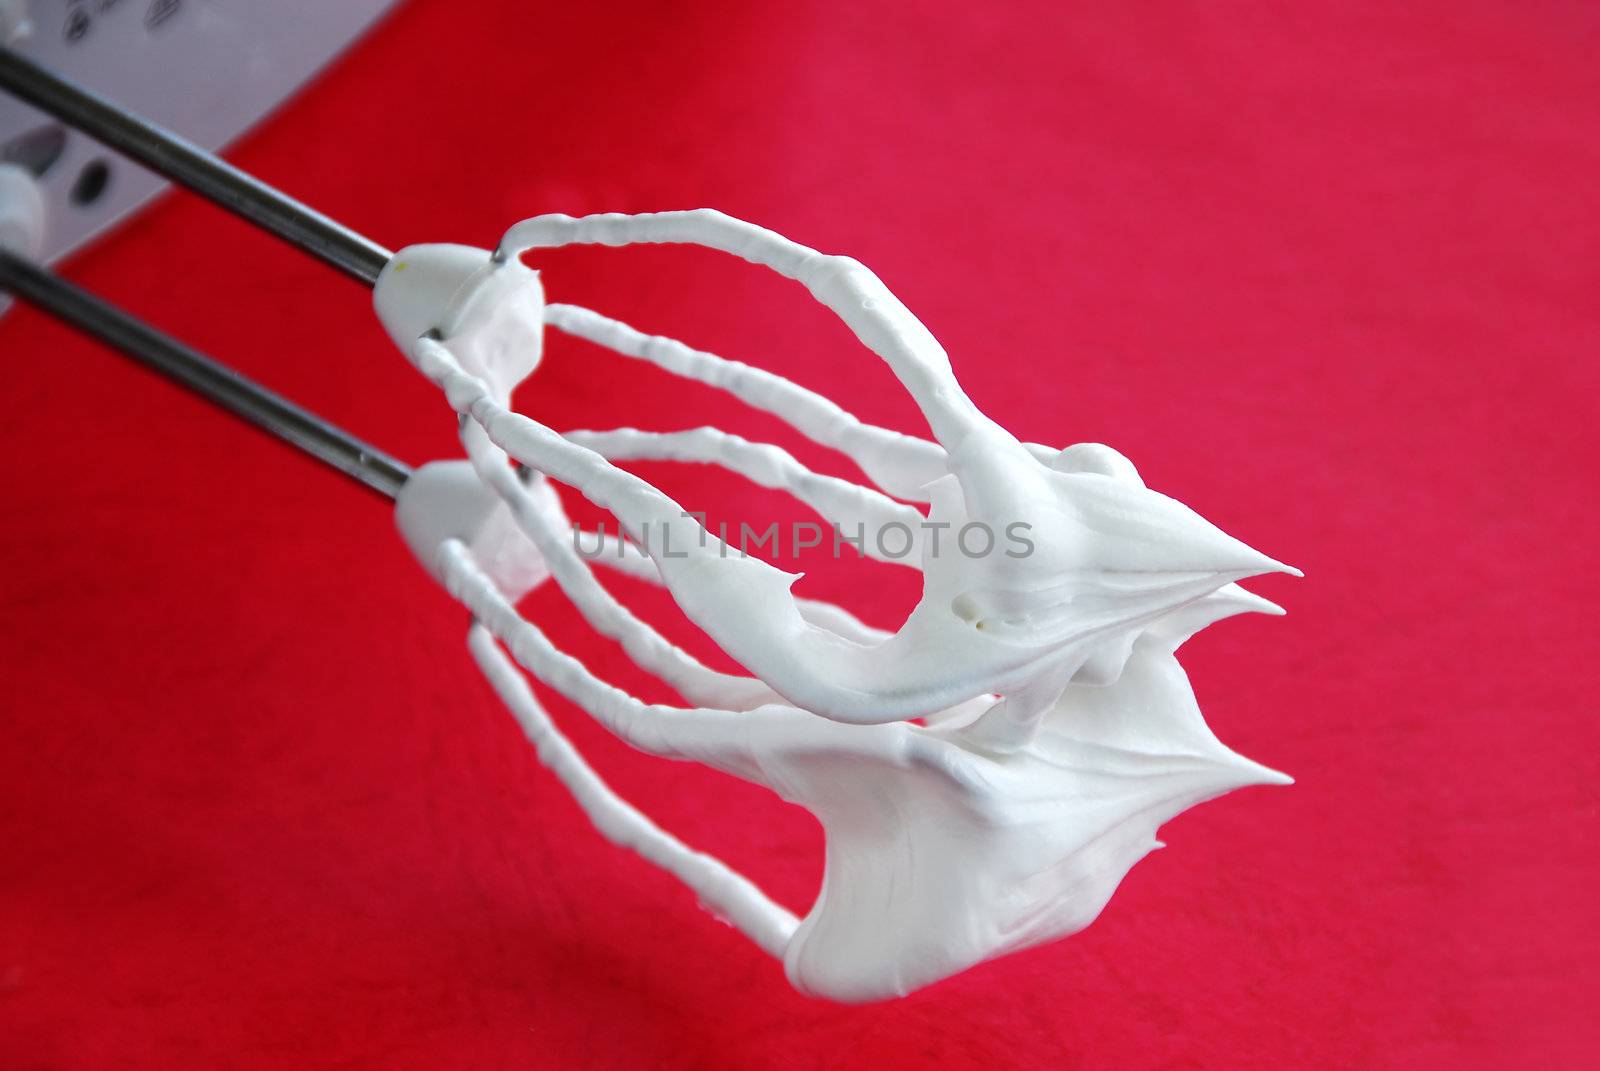 mixer whisks with white cream over red background